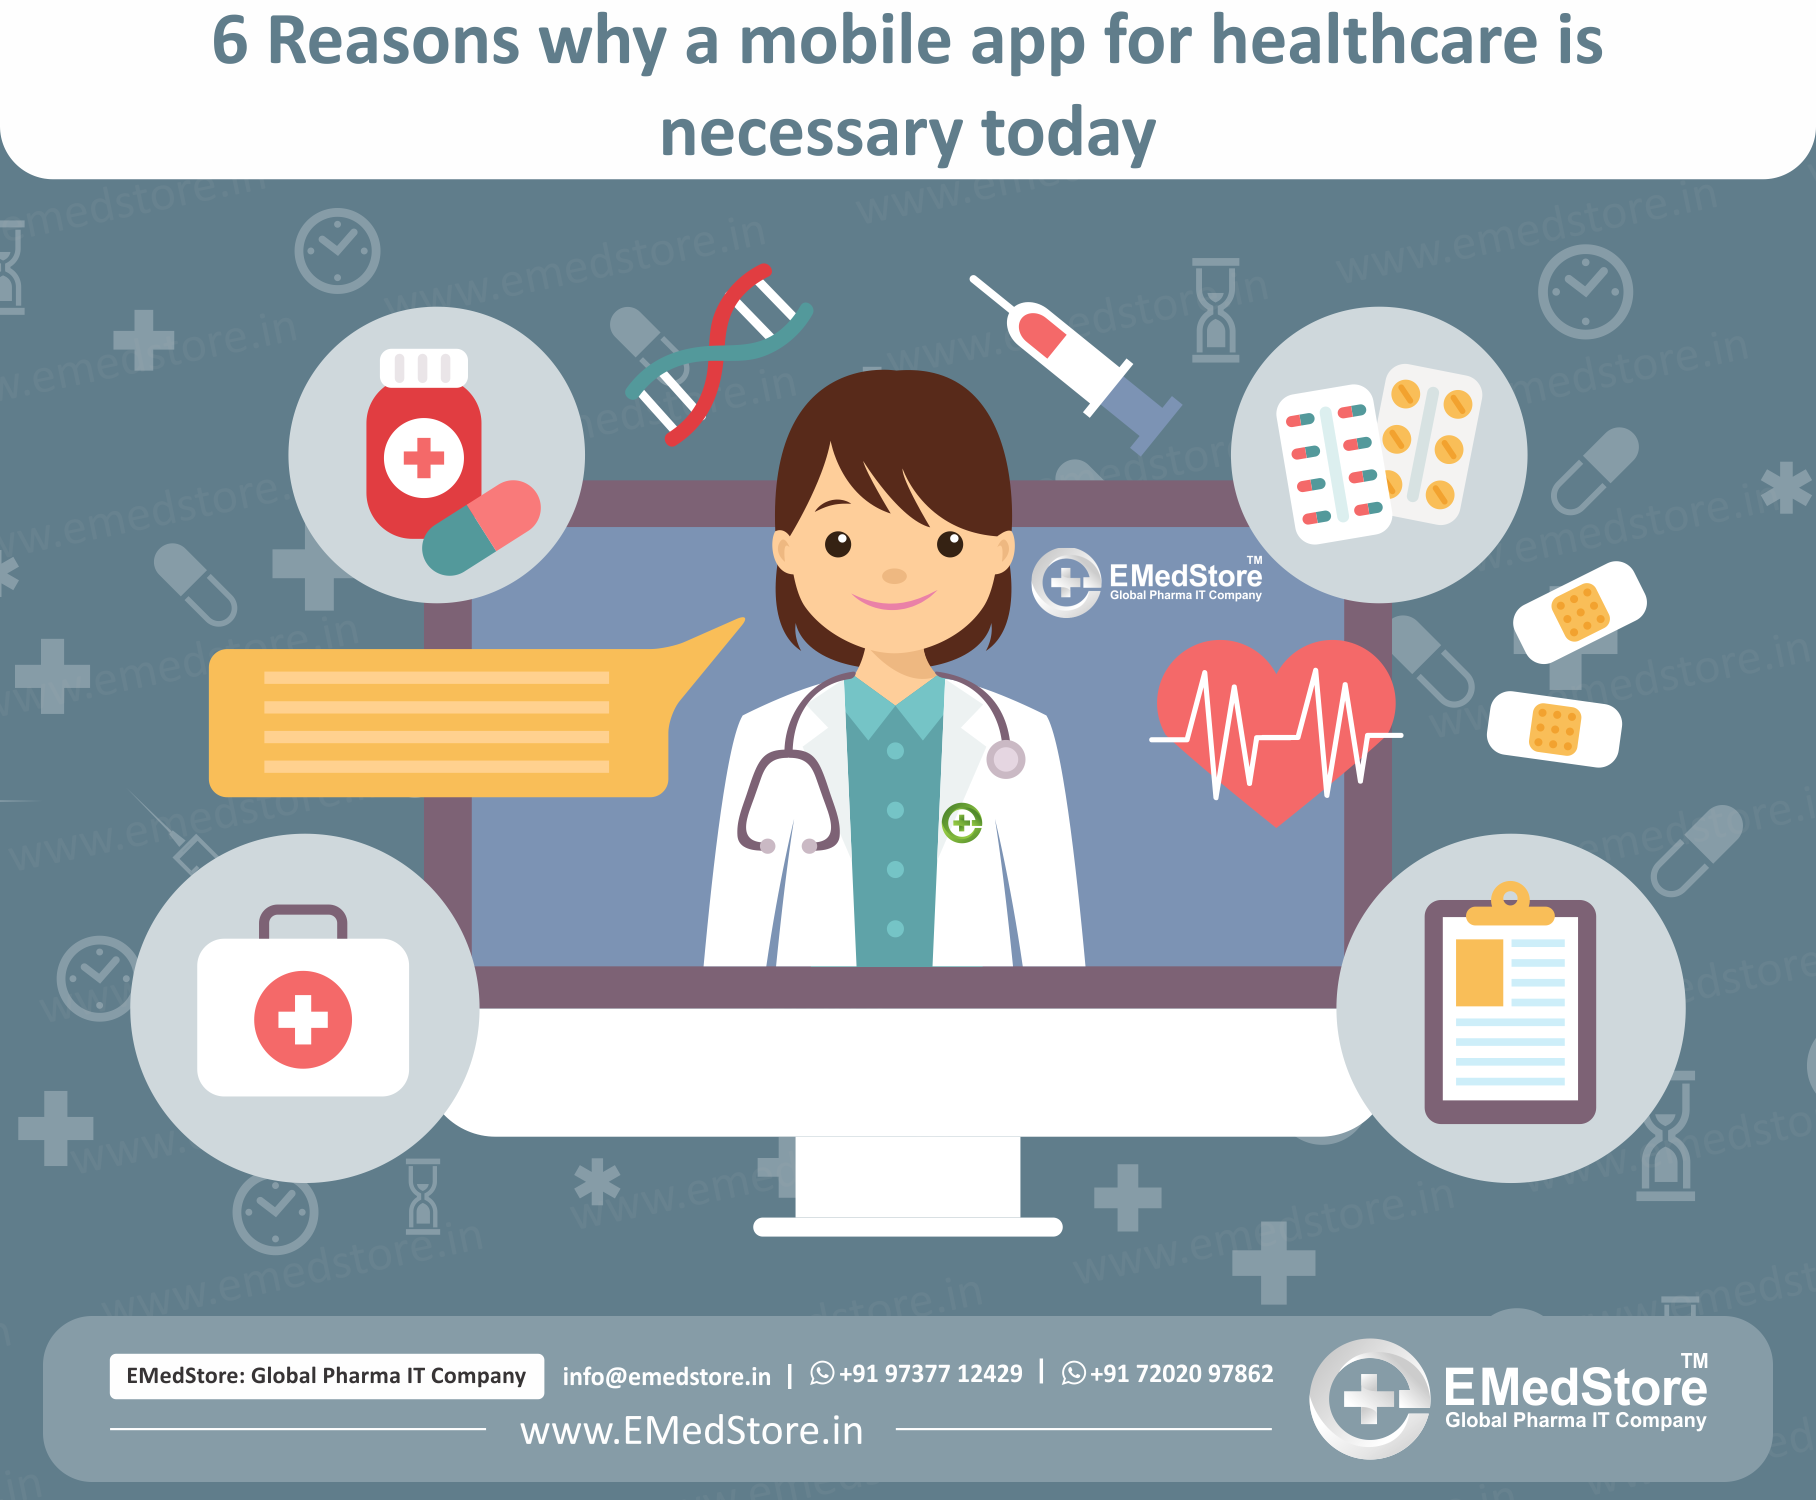 6 Reasons why a mobile app for healthcare is necessary today | EMedStore Blog